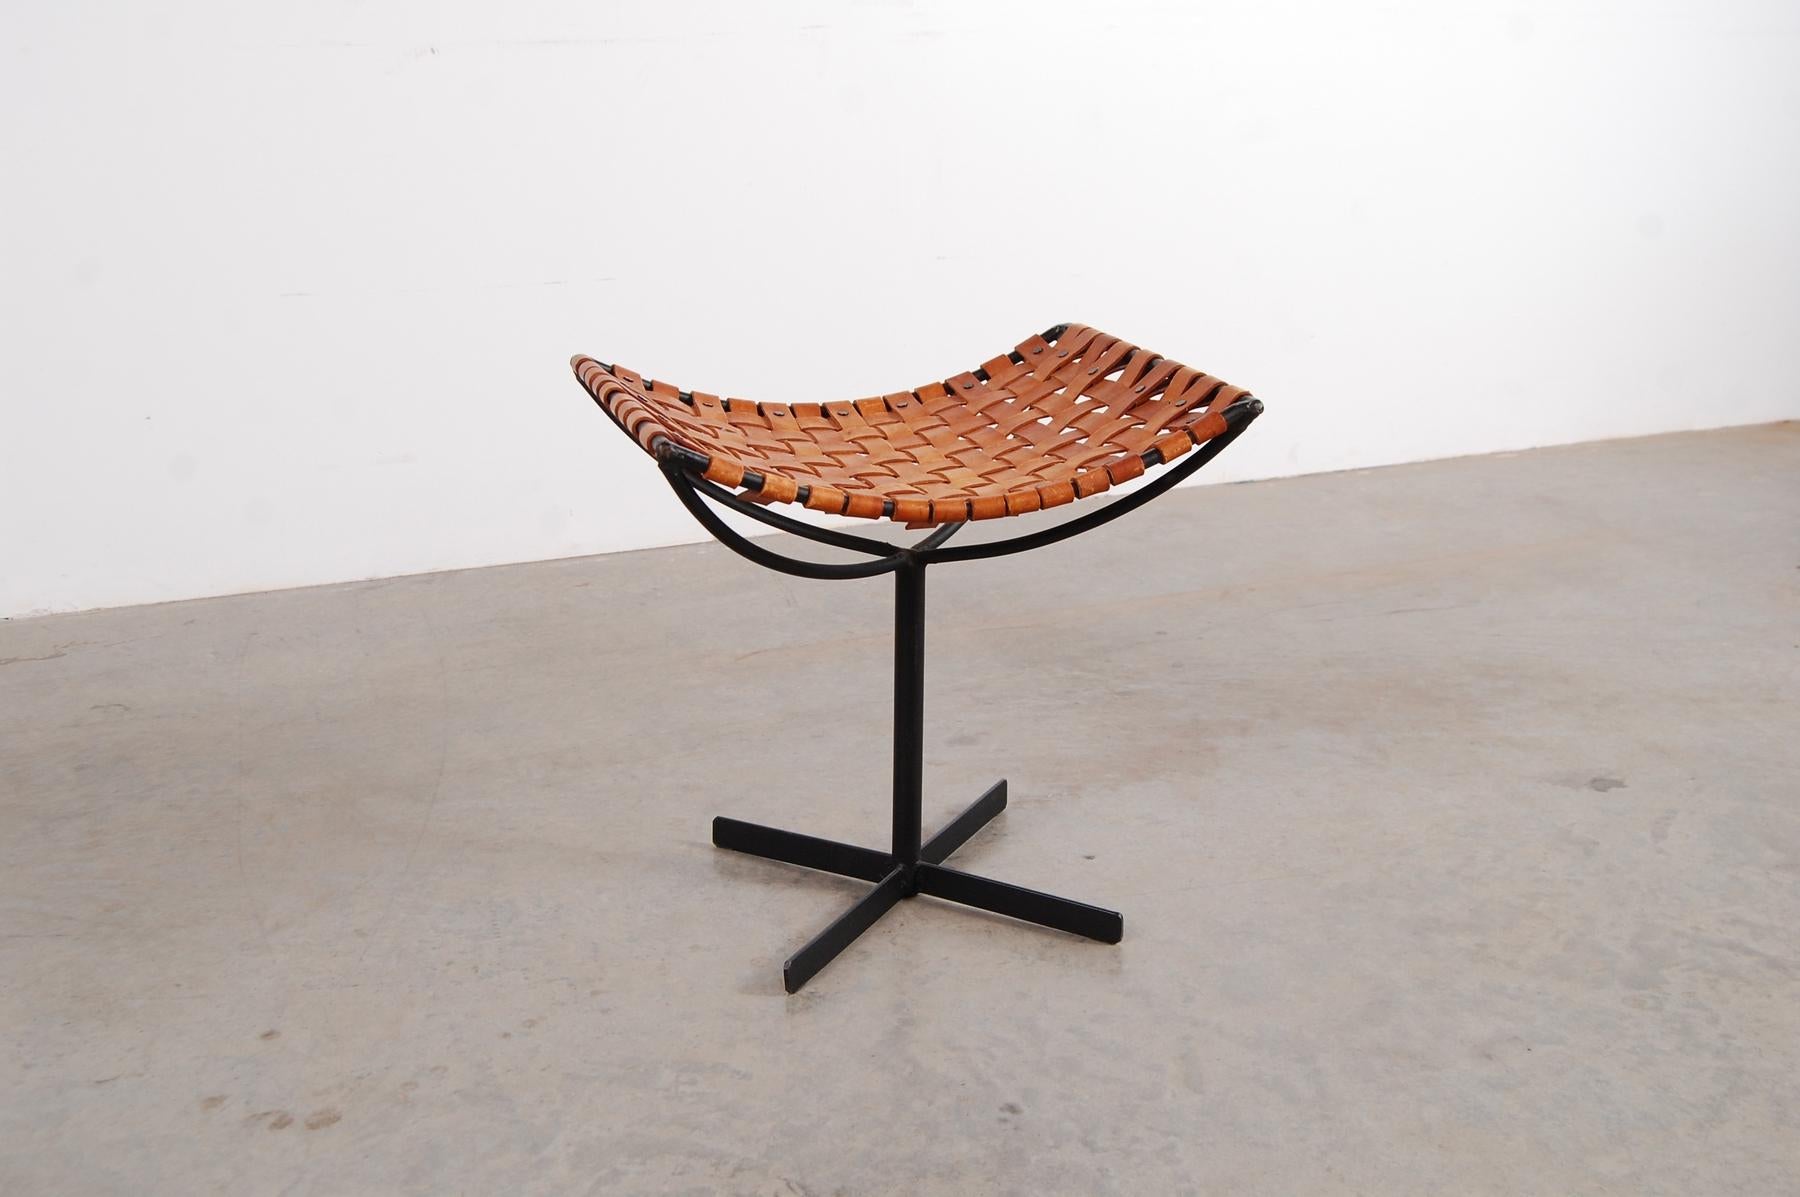 Woven leather and iron stool, designed by Max Gottschalk, circa 1966.